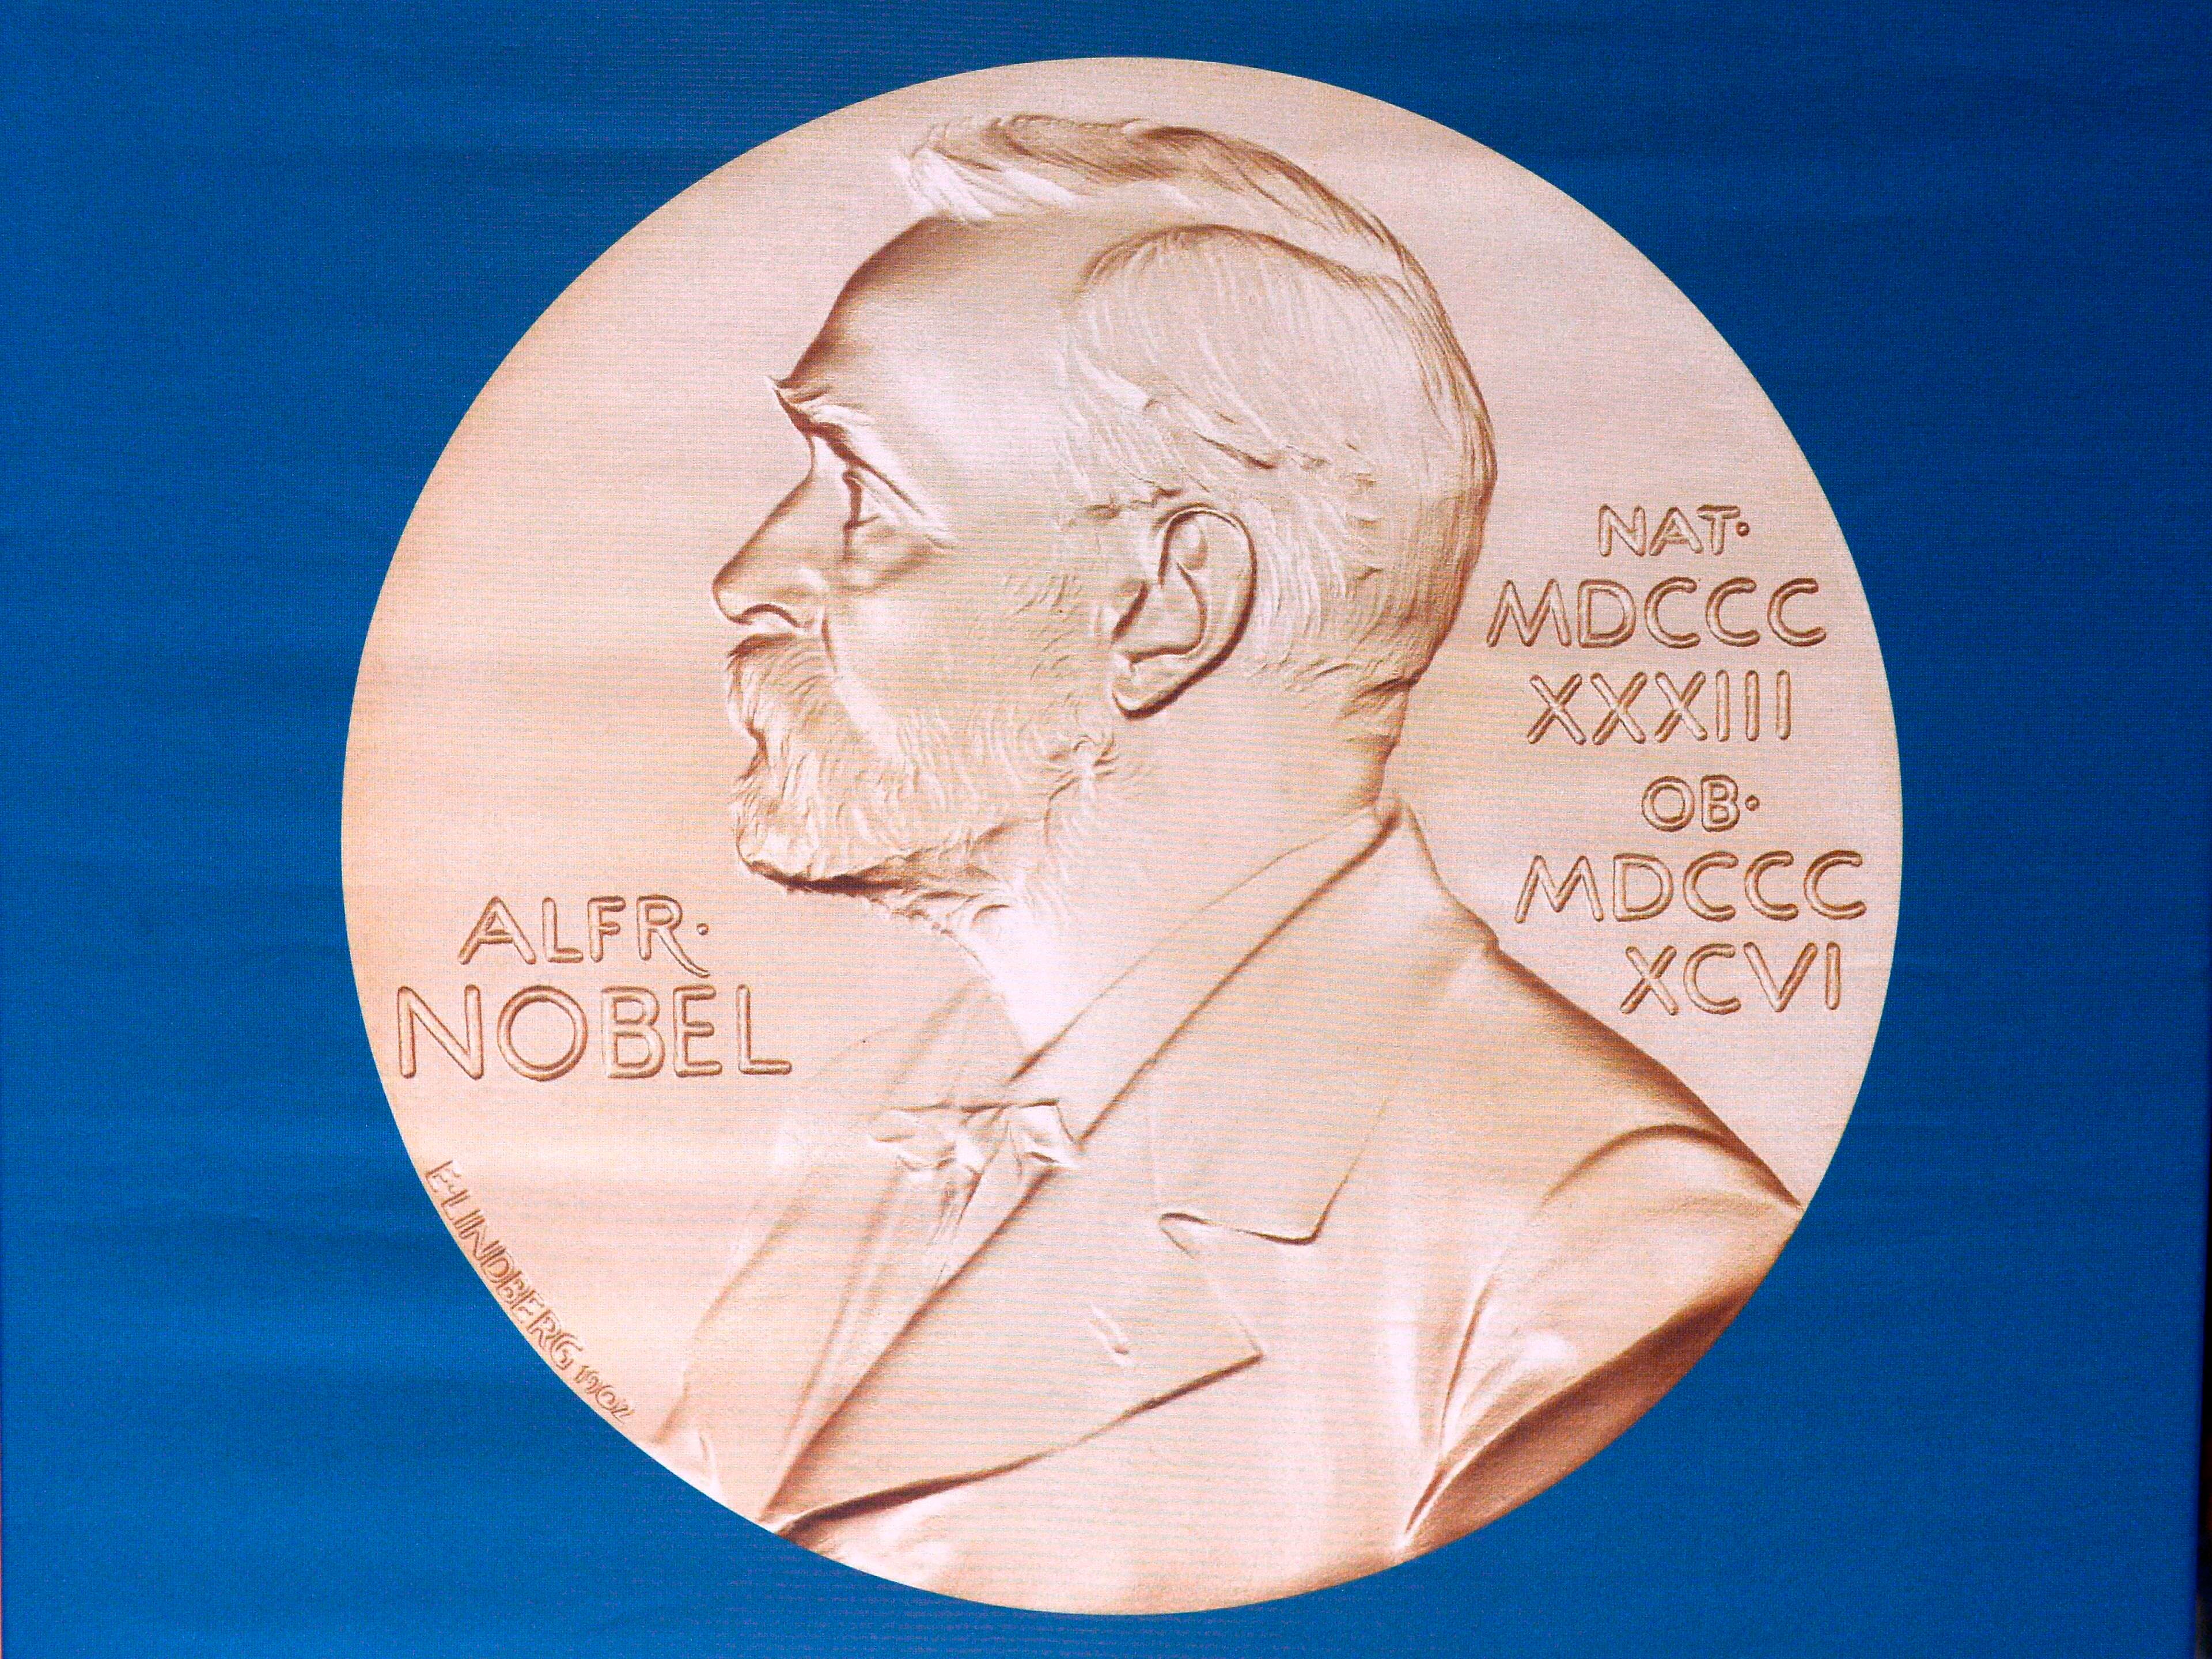 In this file photo taken on October 05, 2015 the laureate medal featuring the portrait of Alfred Nobel. Credit: AFP Photo